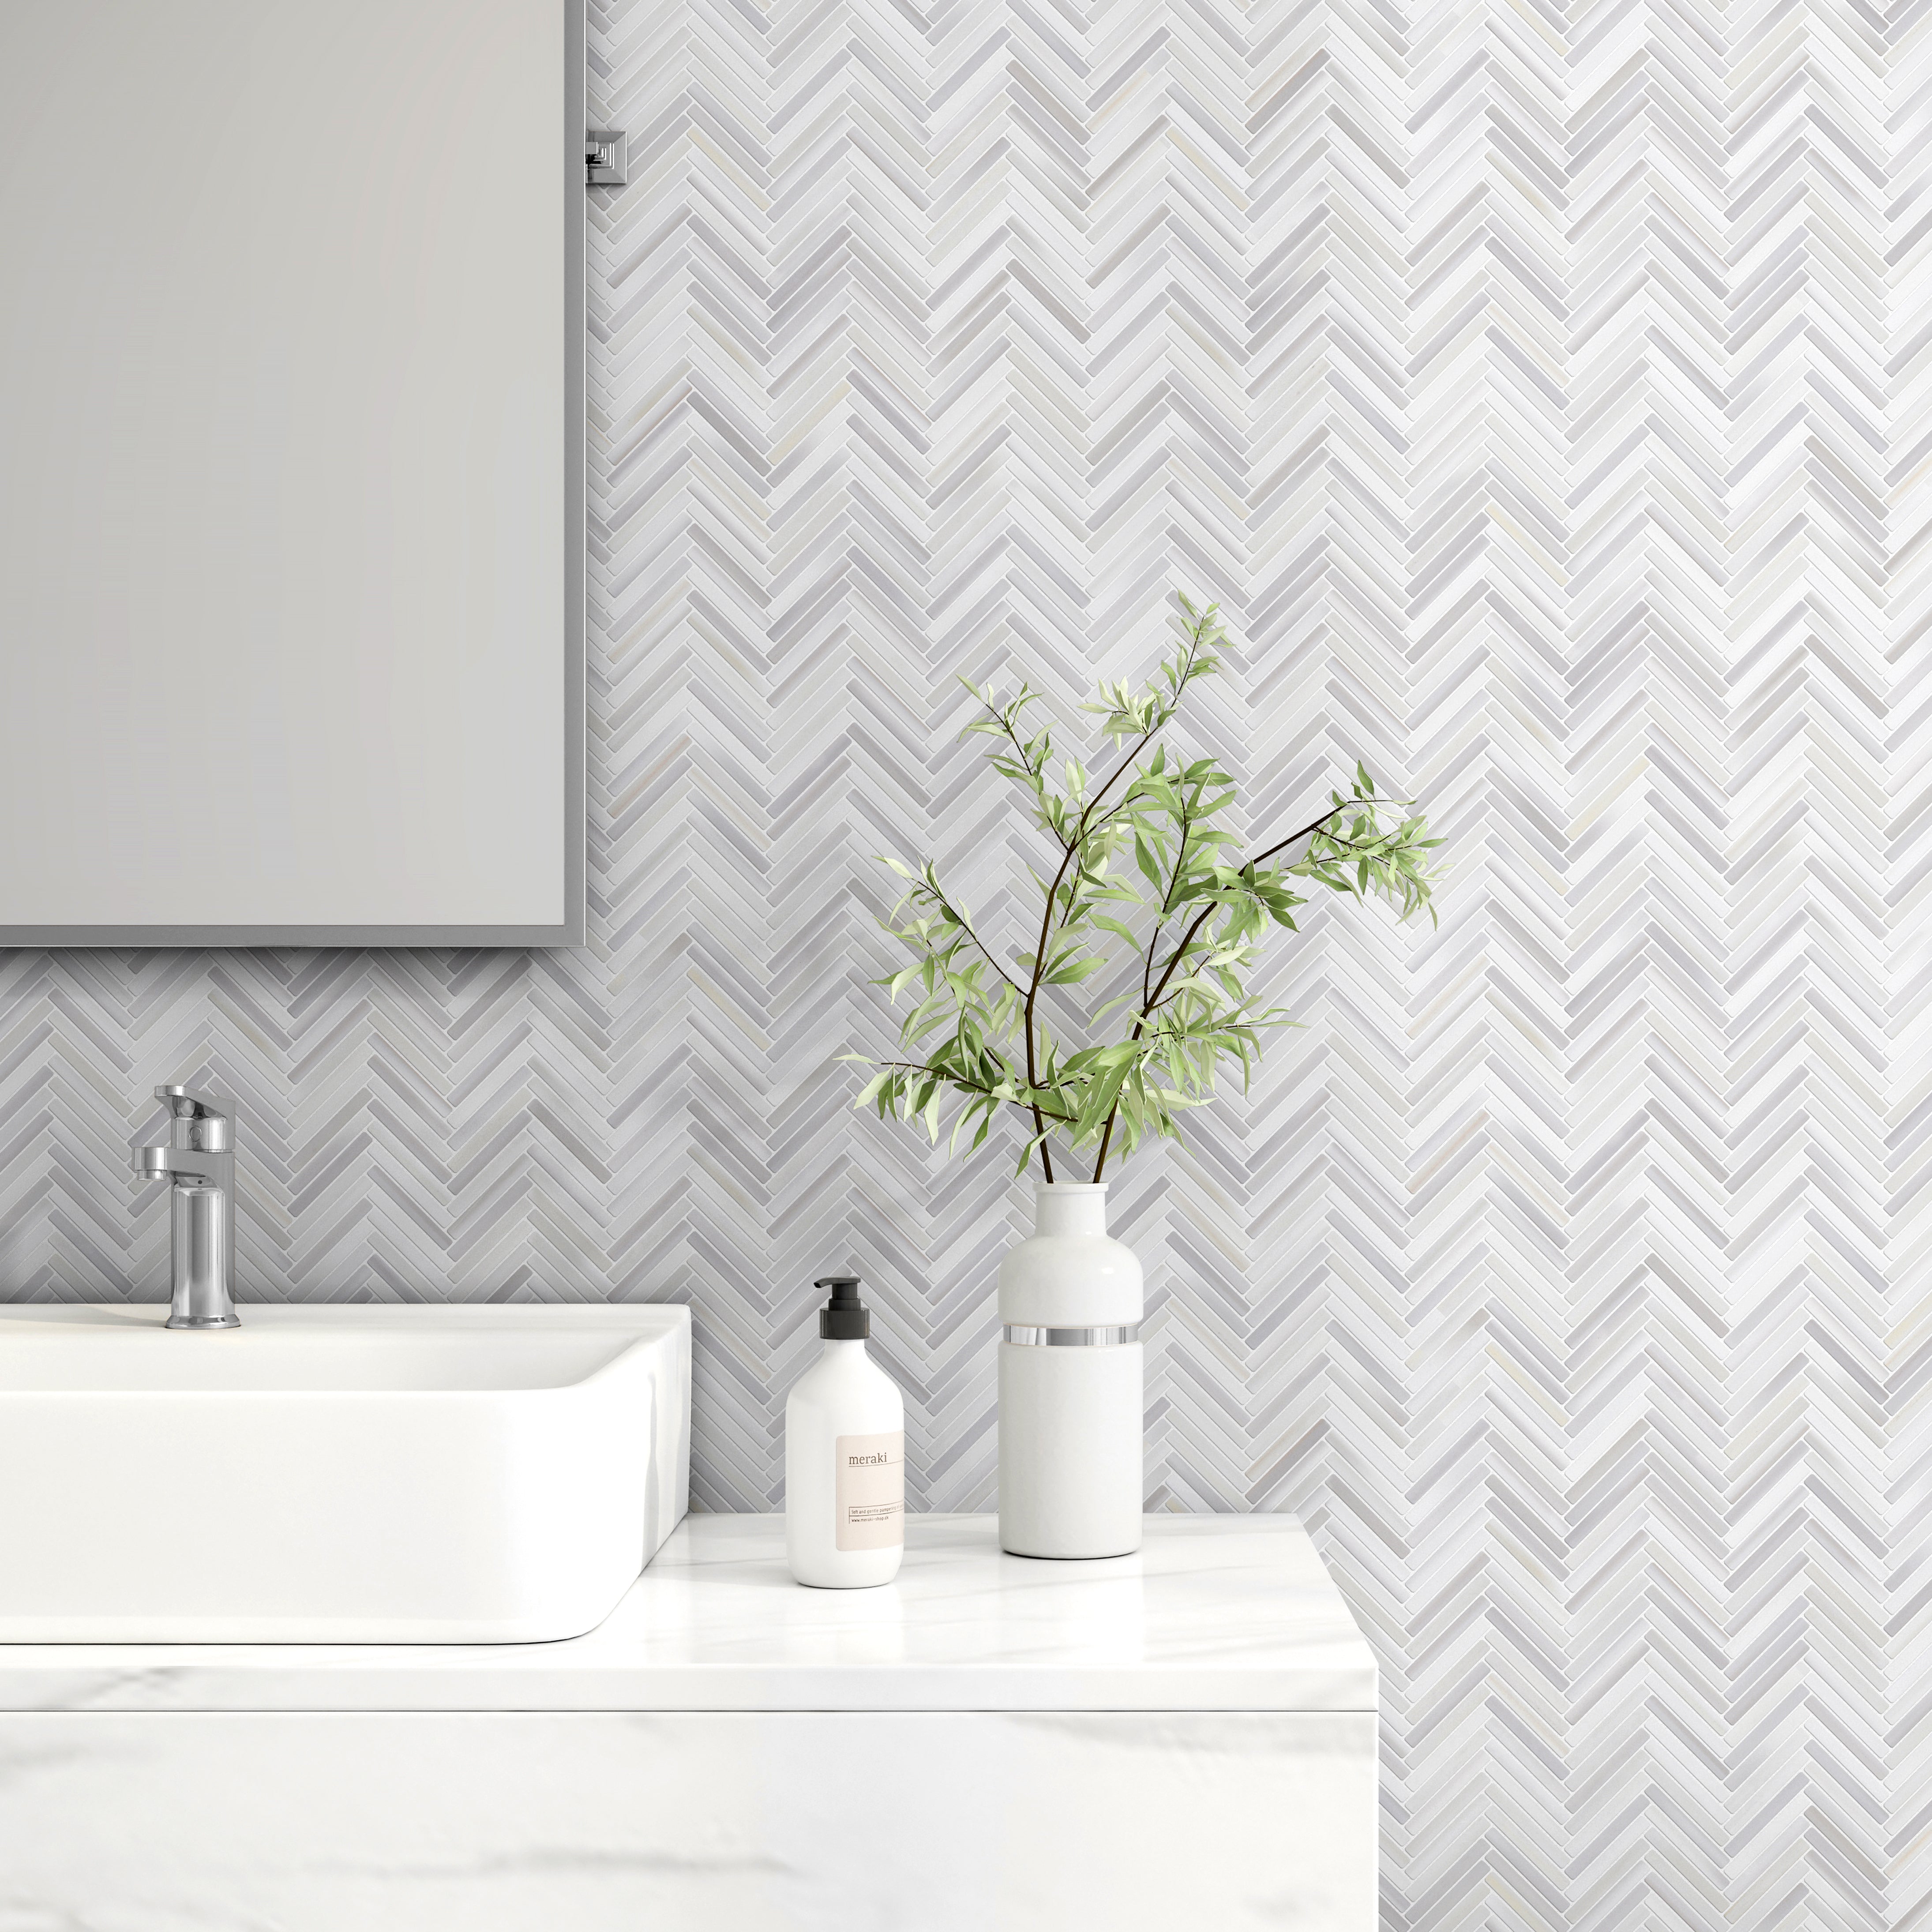 dulcet venus white mini herringbone 1mhervns natural stone mosaic interior 1 made by dulcet and sold by surface group international